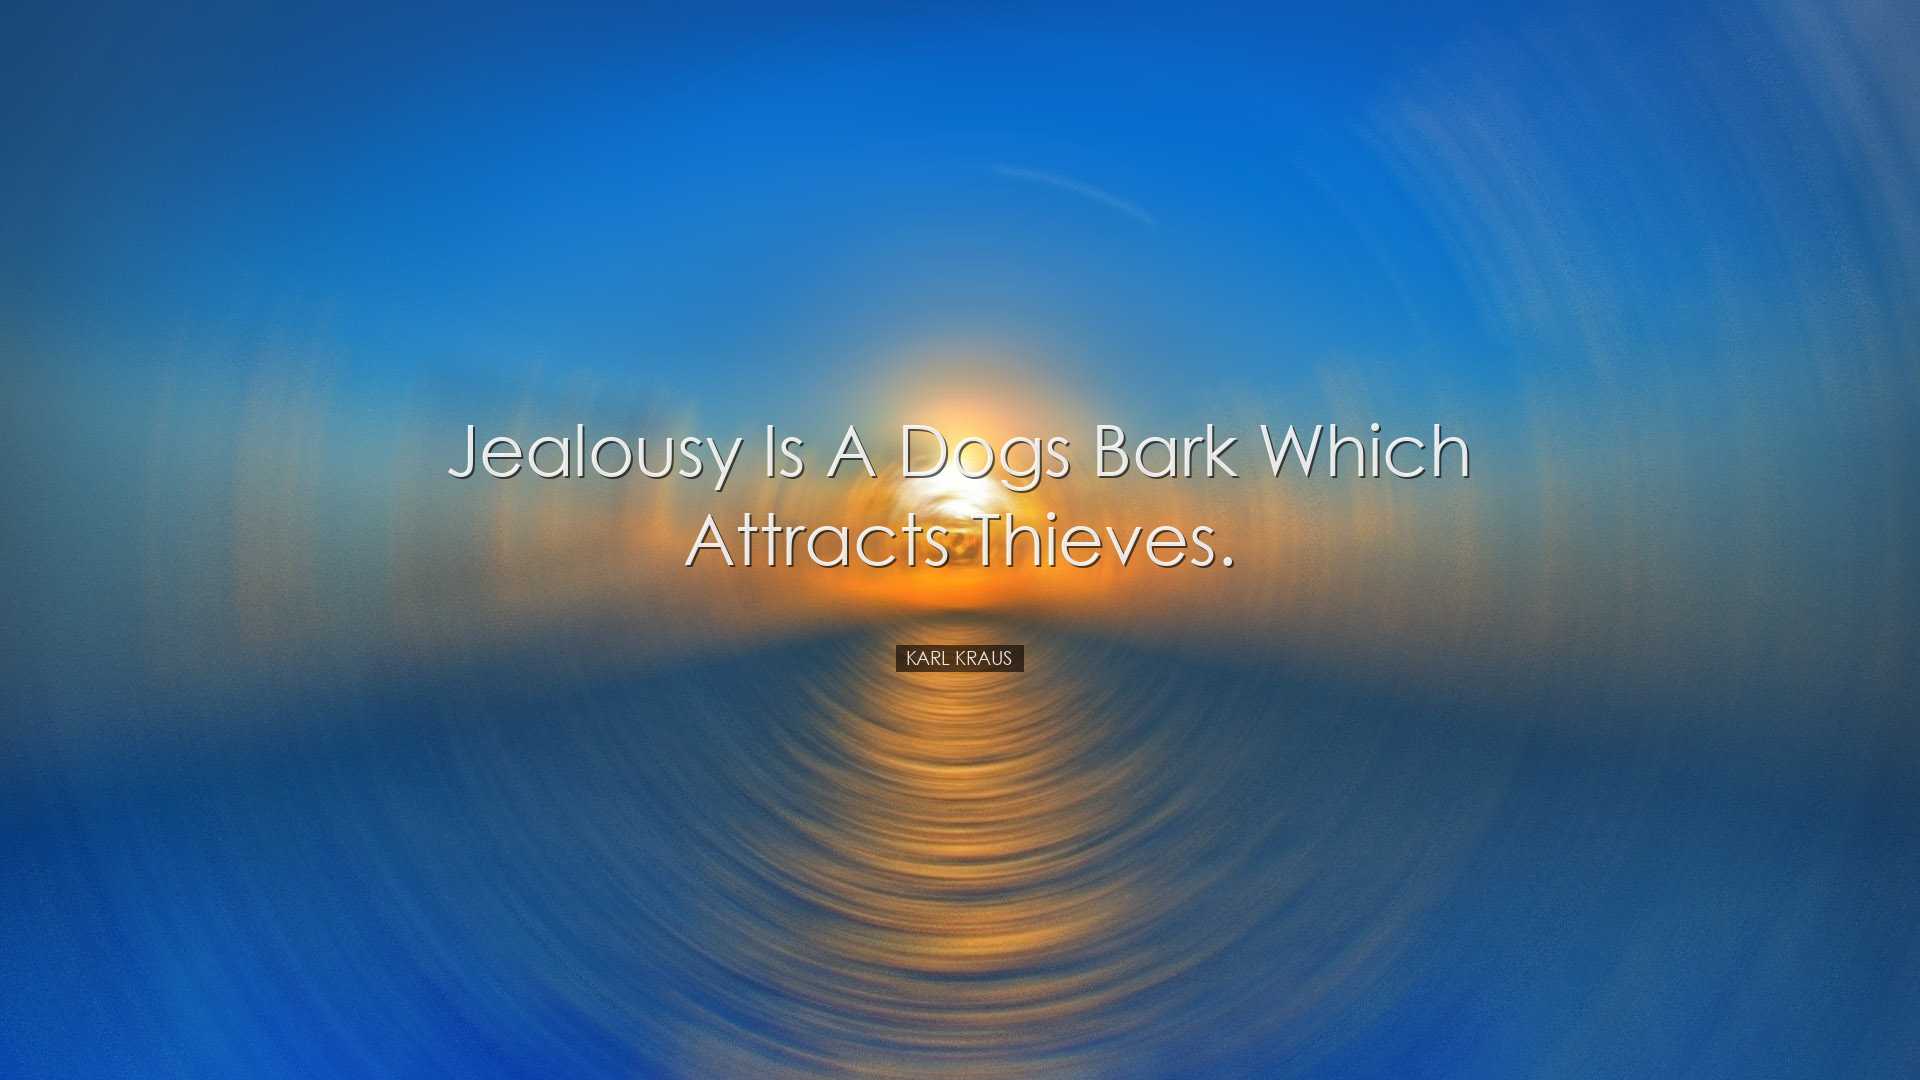 Jealousy is a dogs bark which attracts thieves. - Karl Kraus